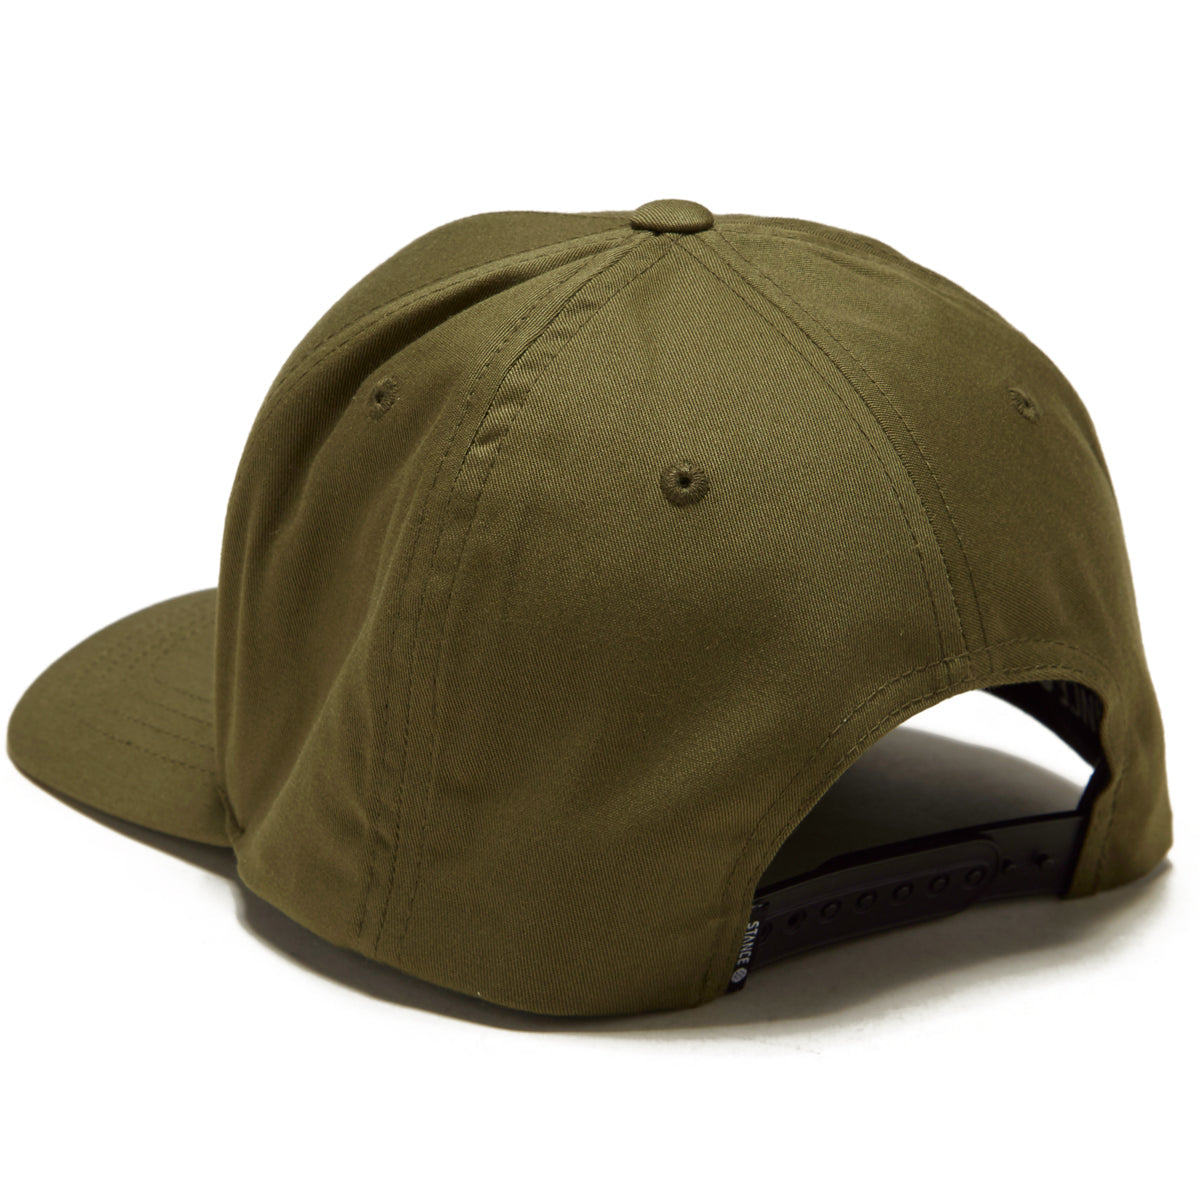 Stance Icon Snapback Hat - Military Green image 2